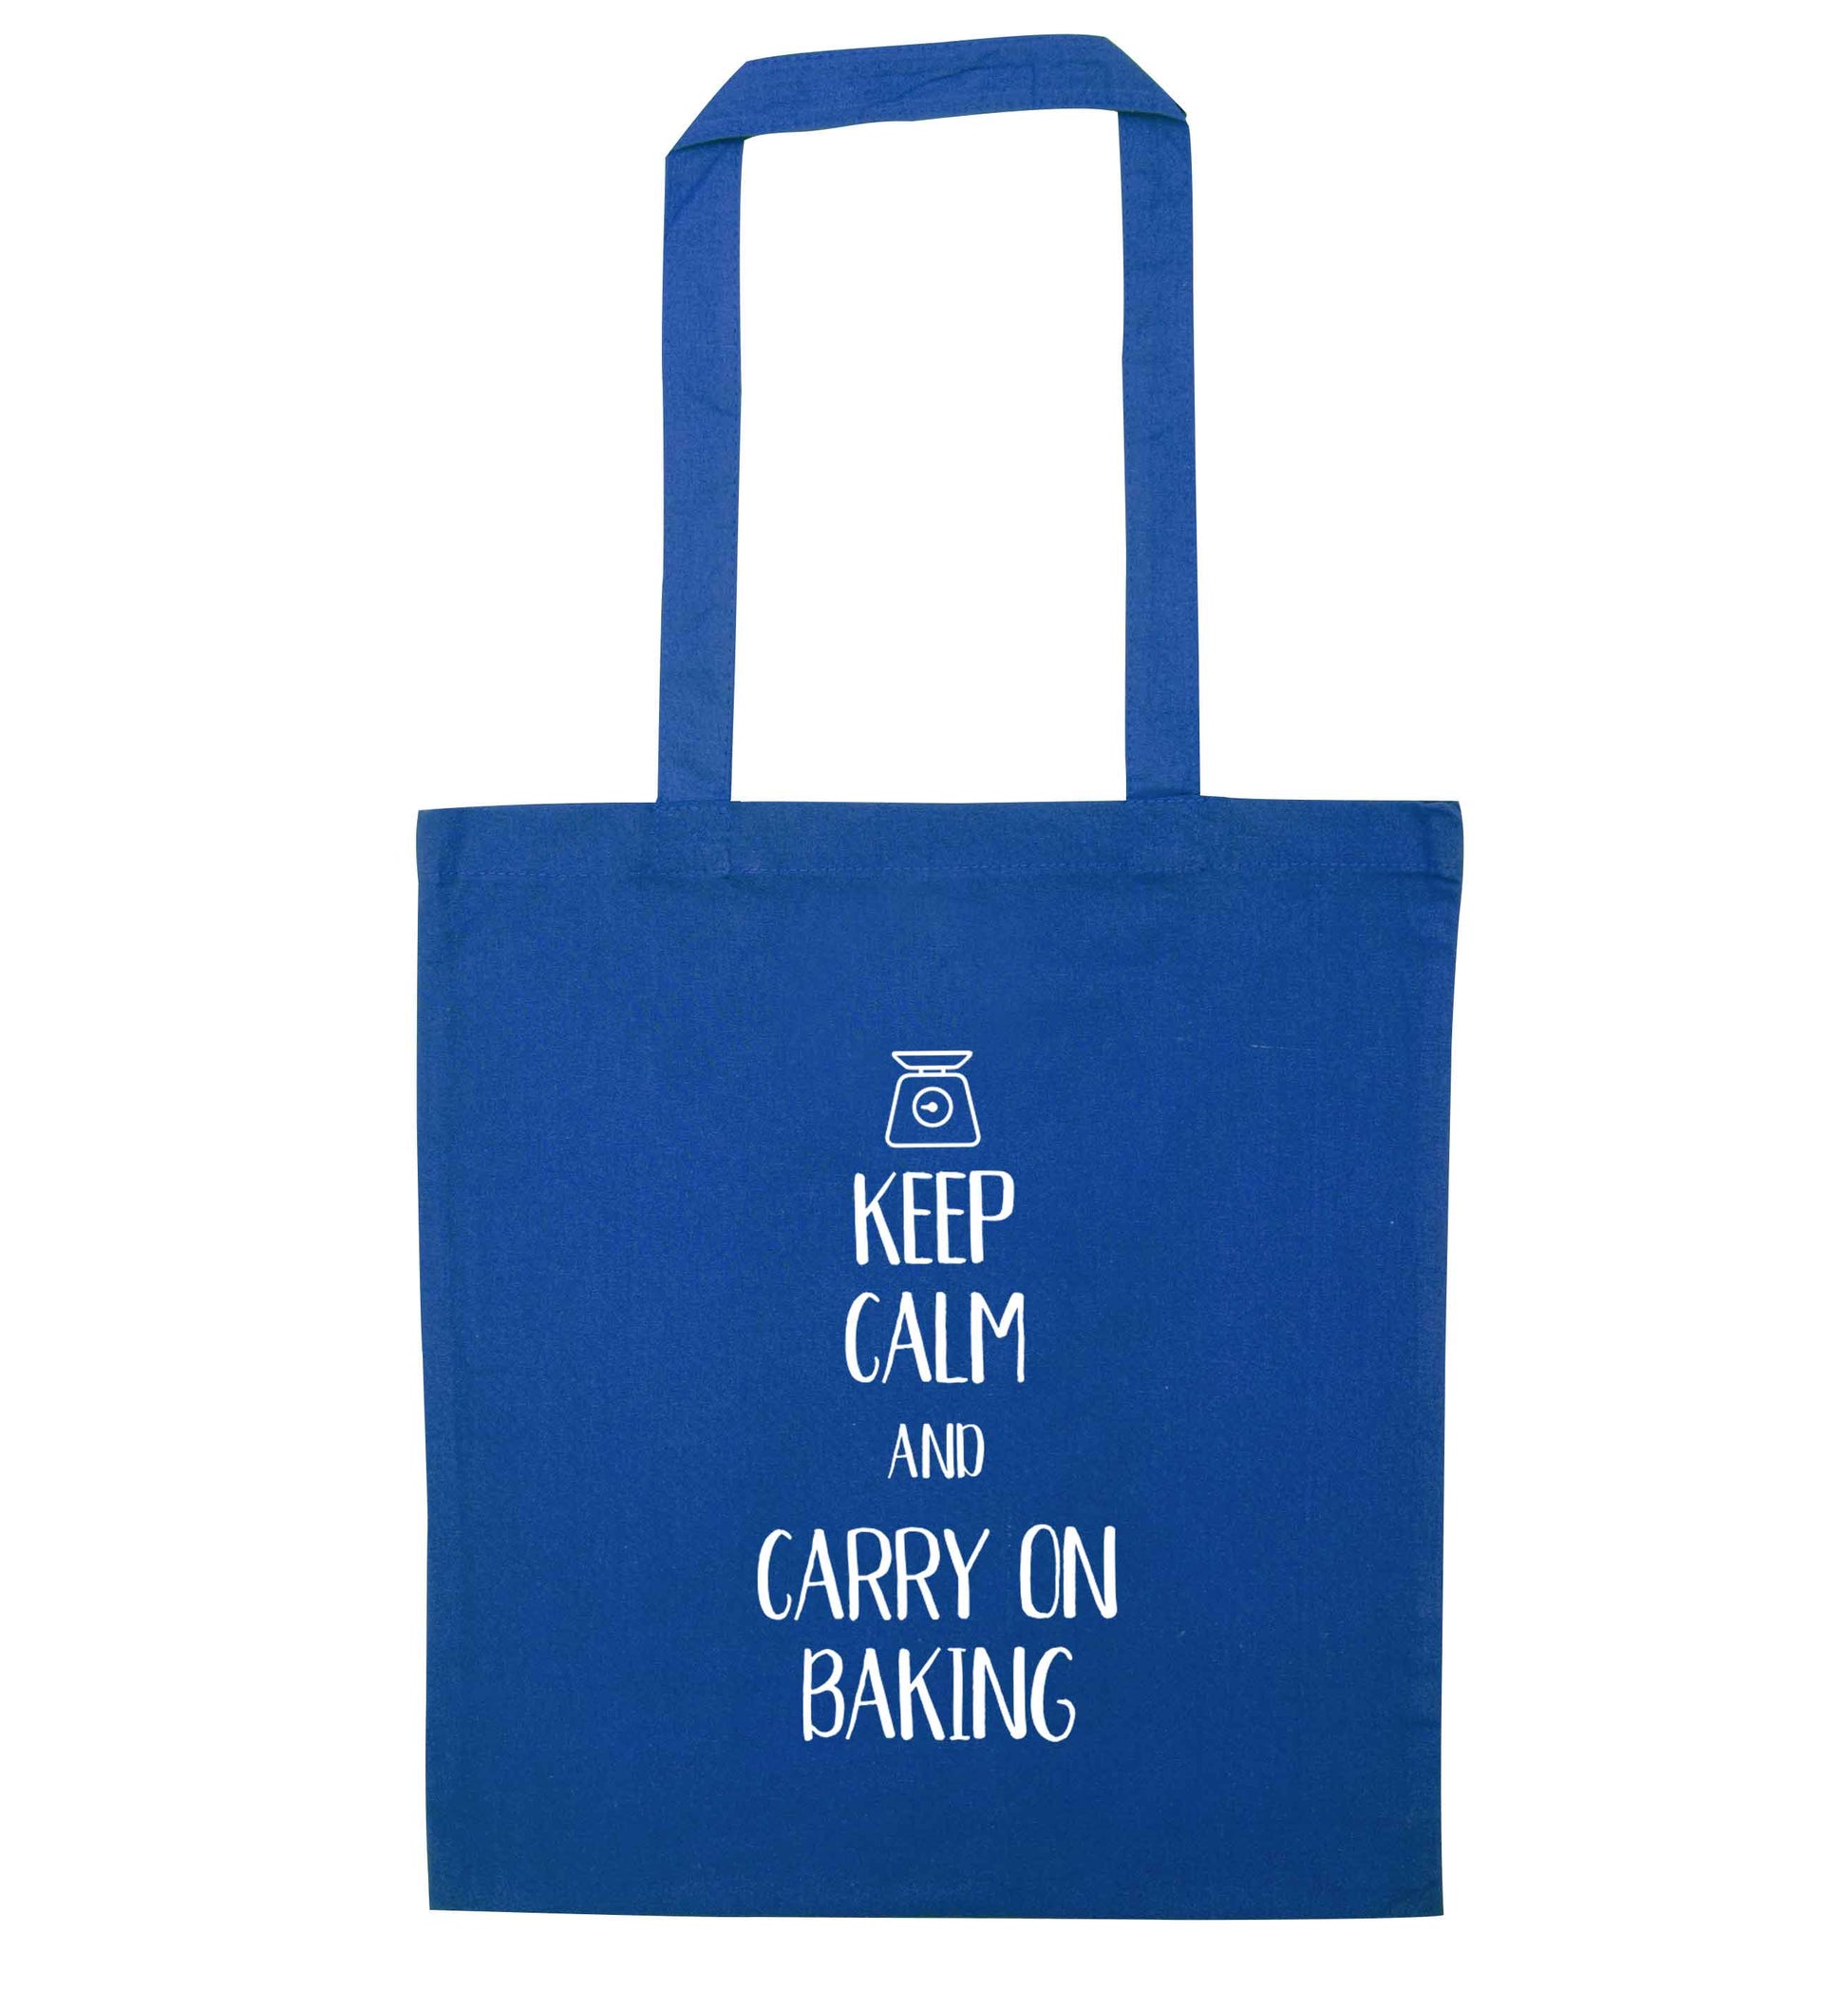 Keep calm and carry on baking blue tote bag